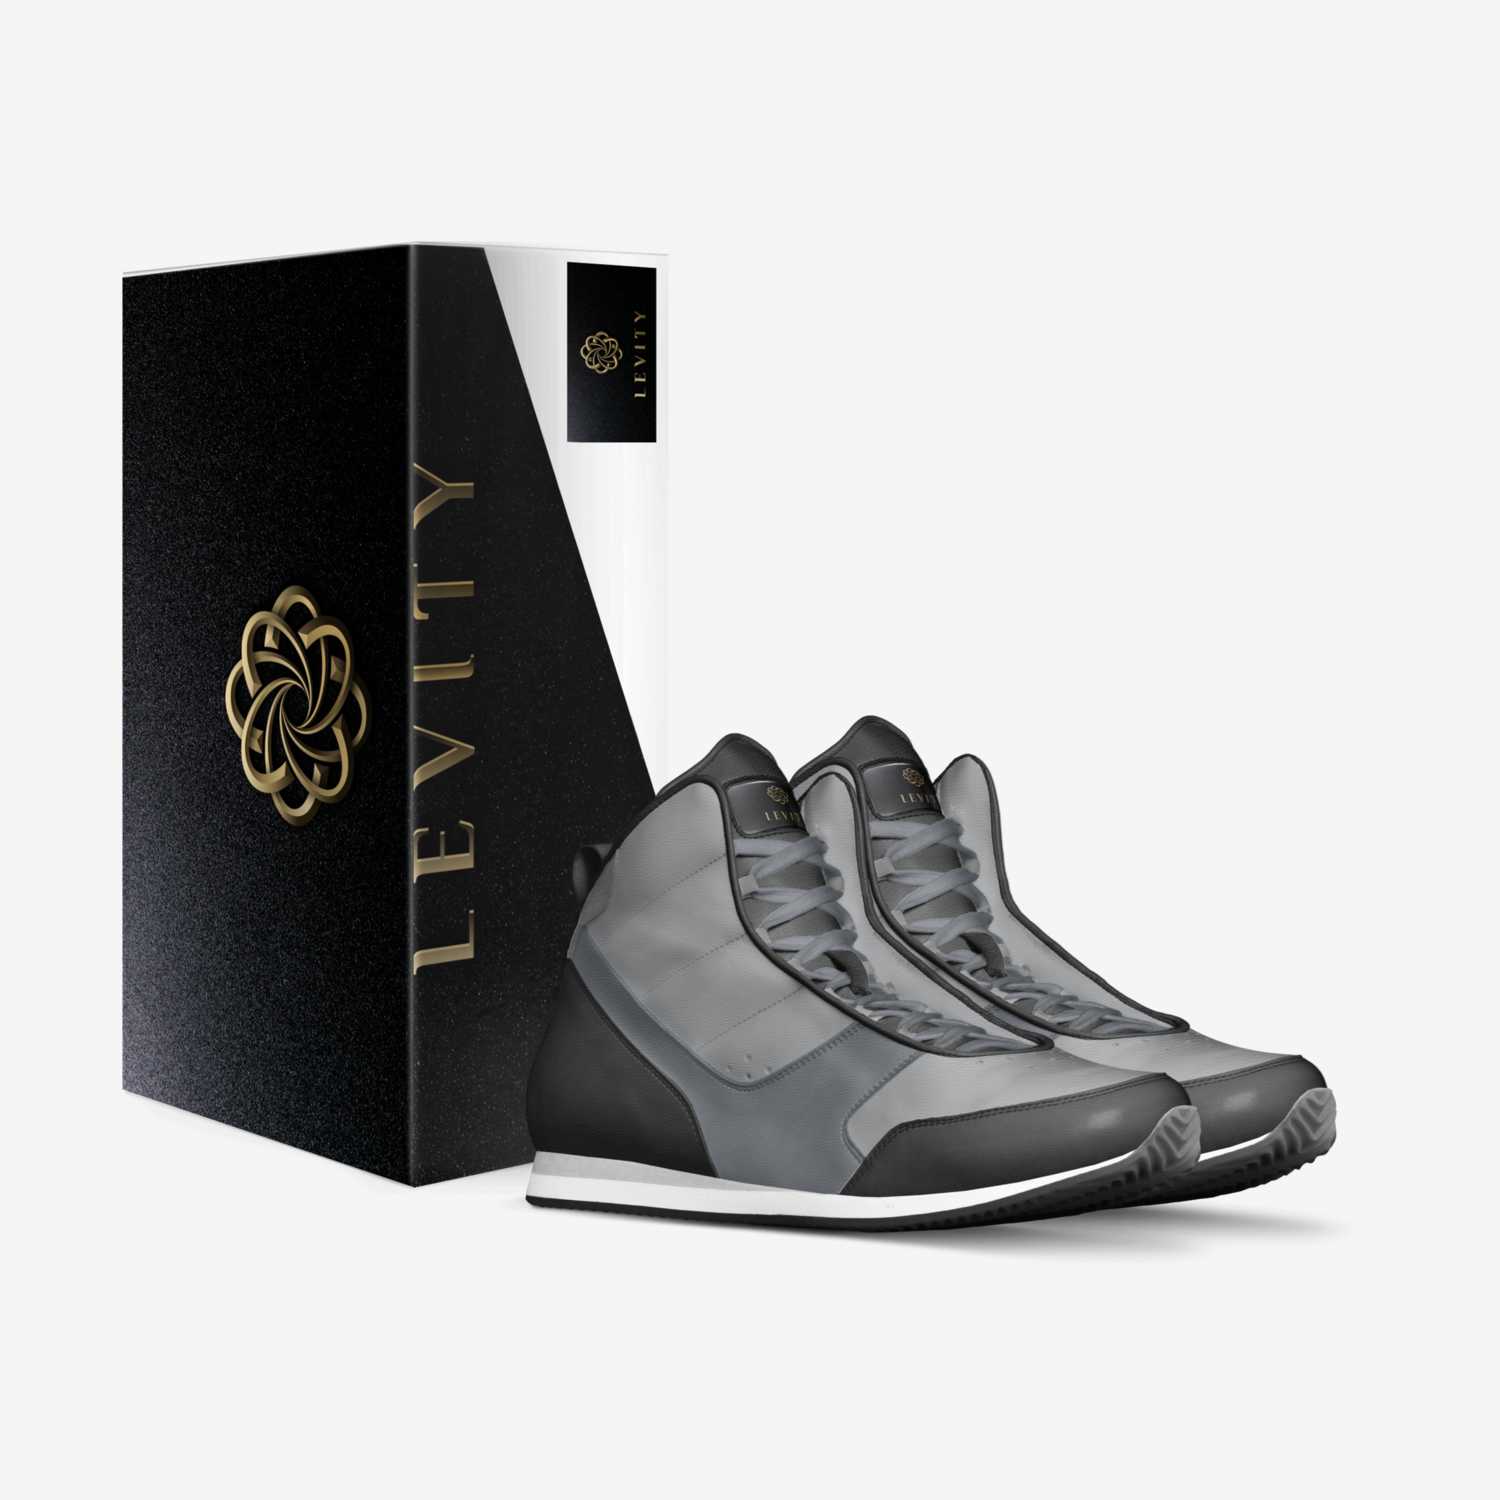 Levity Unnamed custom made in Italy shoes by Jafar Scott | Box view